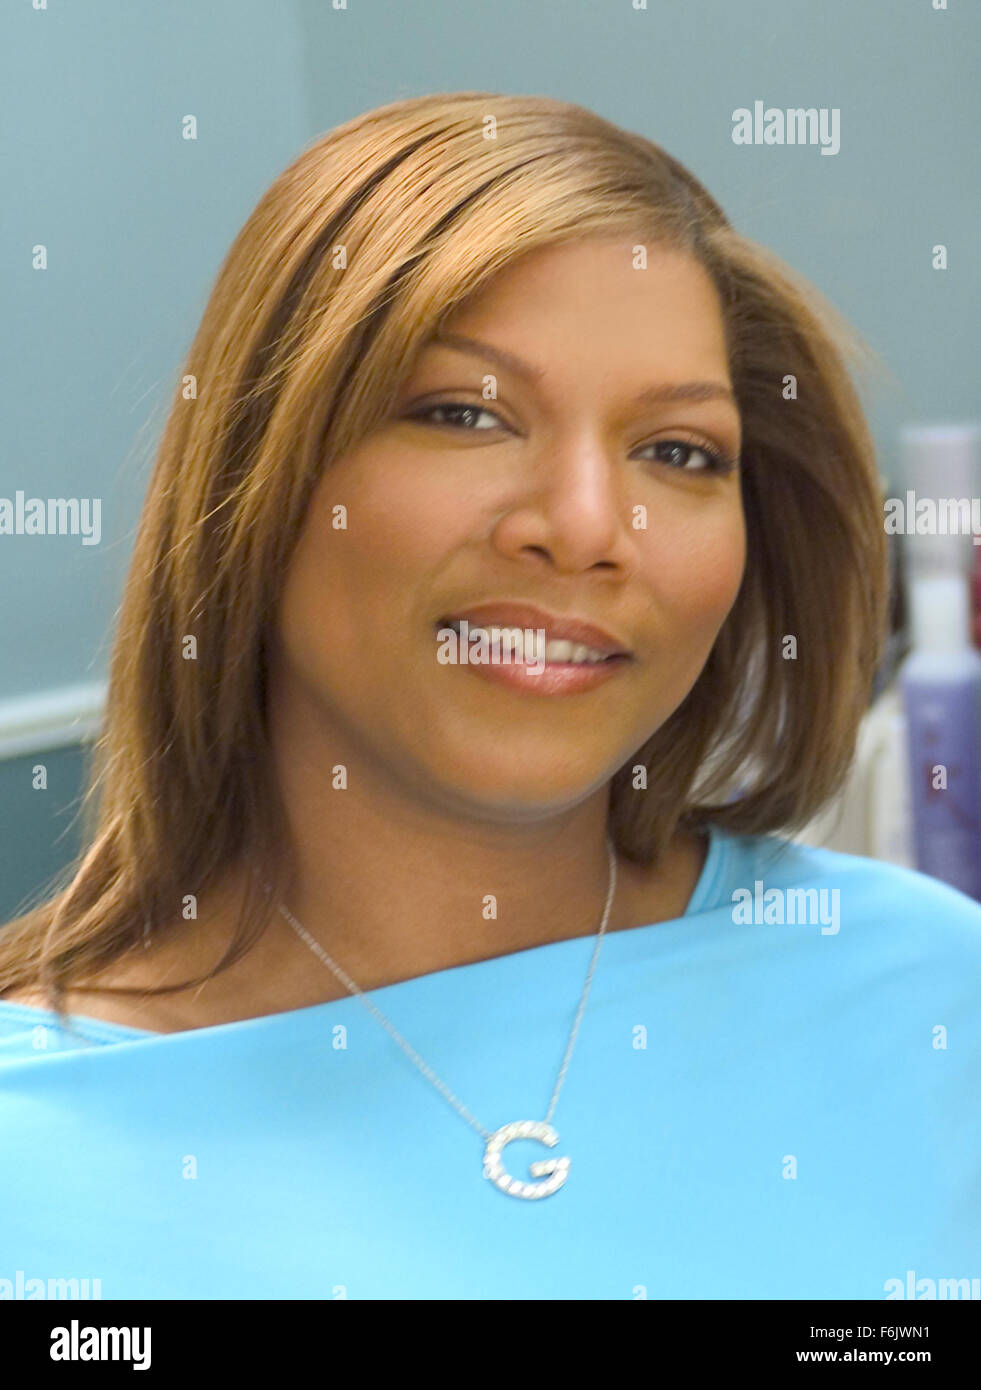 RELEASE DATE: March 30, 2005. MOVIE TITLE: Beauty Shop. STUDIO: MGM. PLOT: Gina is a hairstylist who opens up a beauty shop full of employees and customers more interested in speaking their minds than getting a cut. PICTURED: QUEEN LATIFAH as Gina. Stock Photo